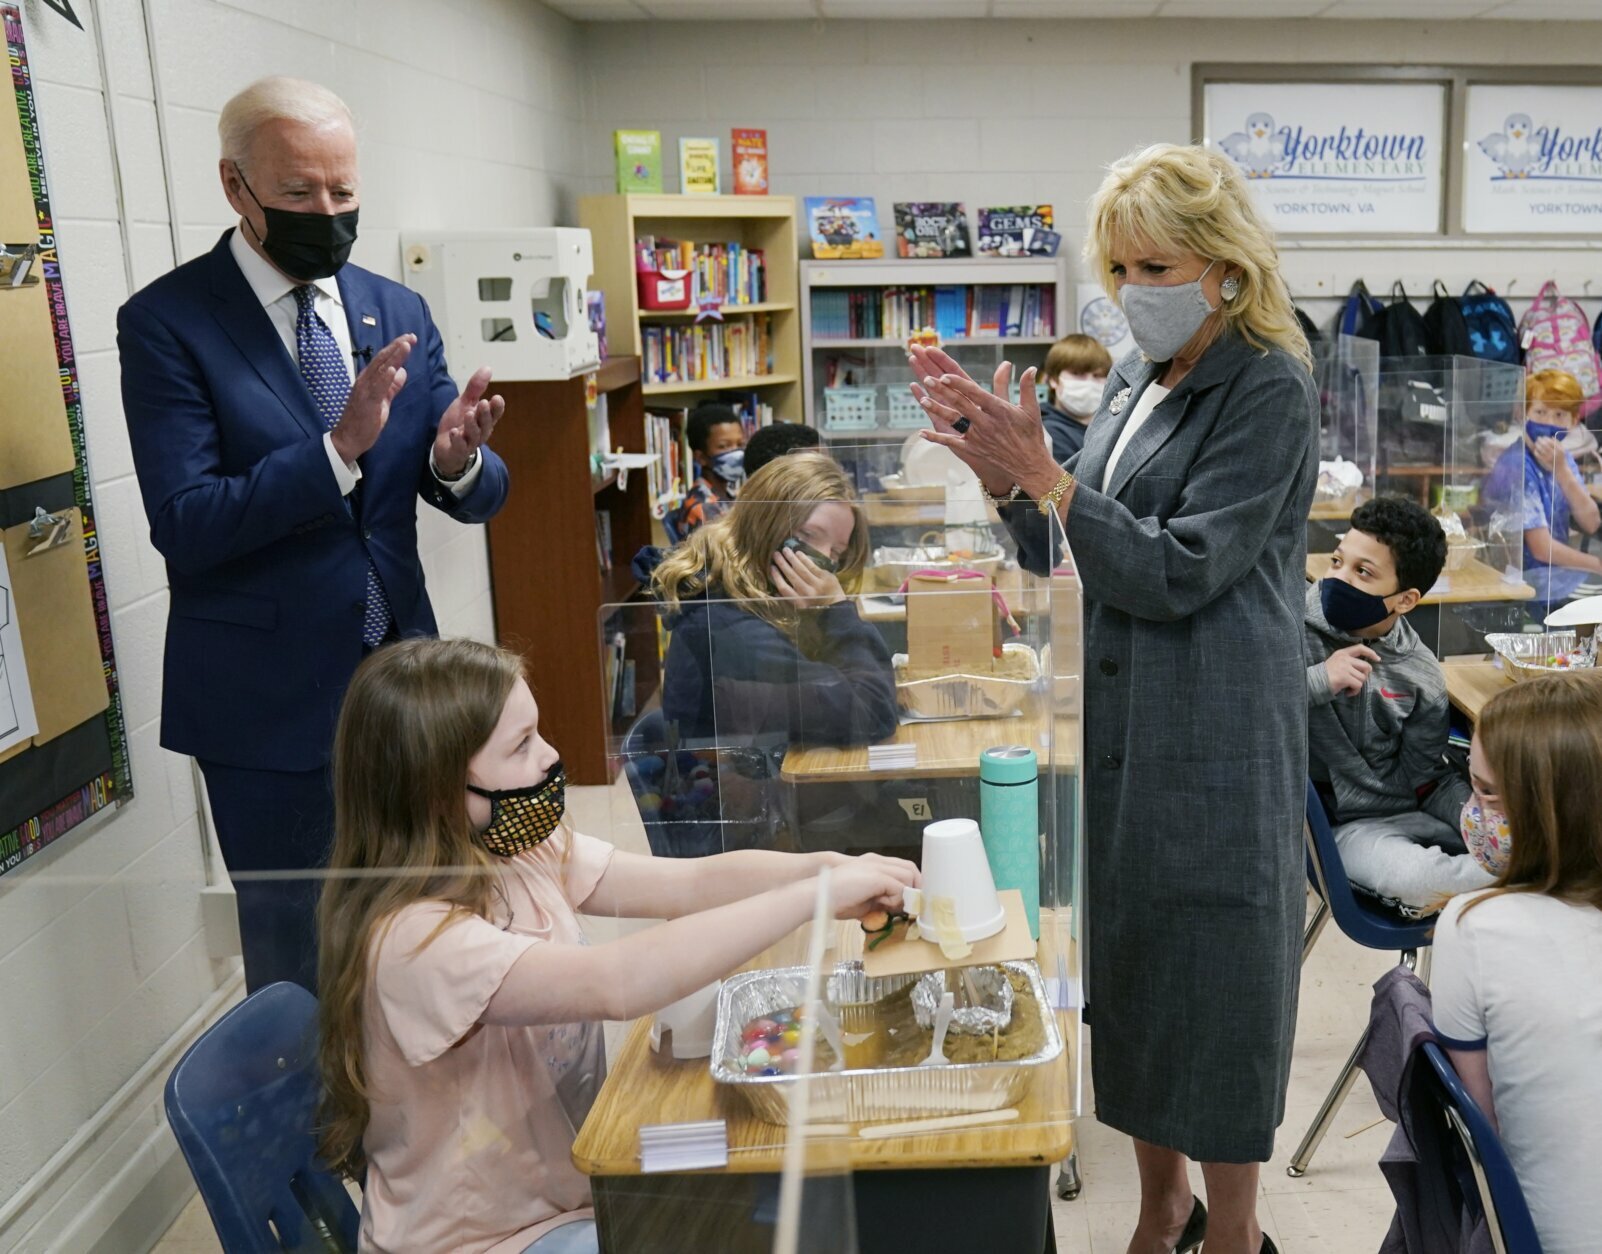 President Joe Biden and first lady Jill Biden applaud a student as she demonstrates her project, during a visit to Yorktown Elementary School, Monday, May 3, 2021, in Yorktown, Va. (AP Photo/Evan Vucci)